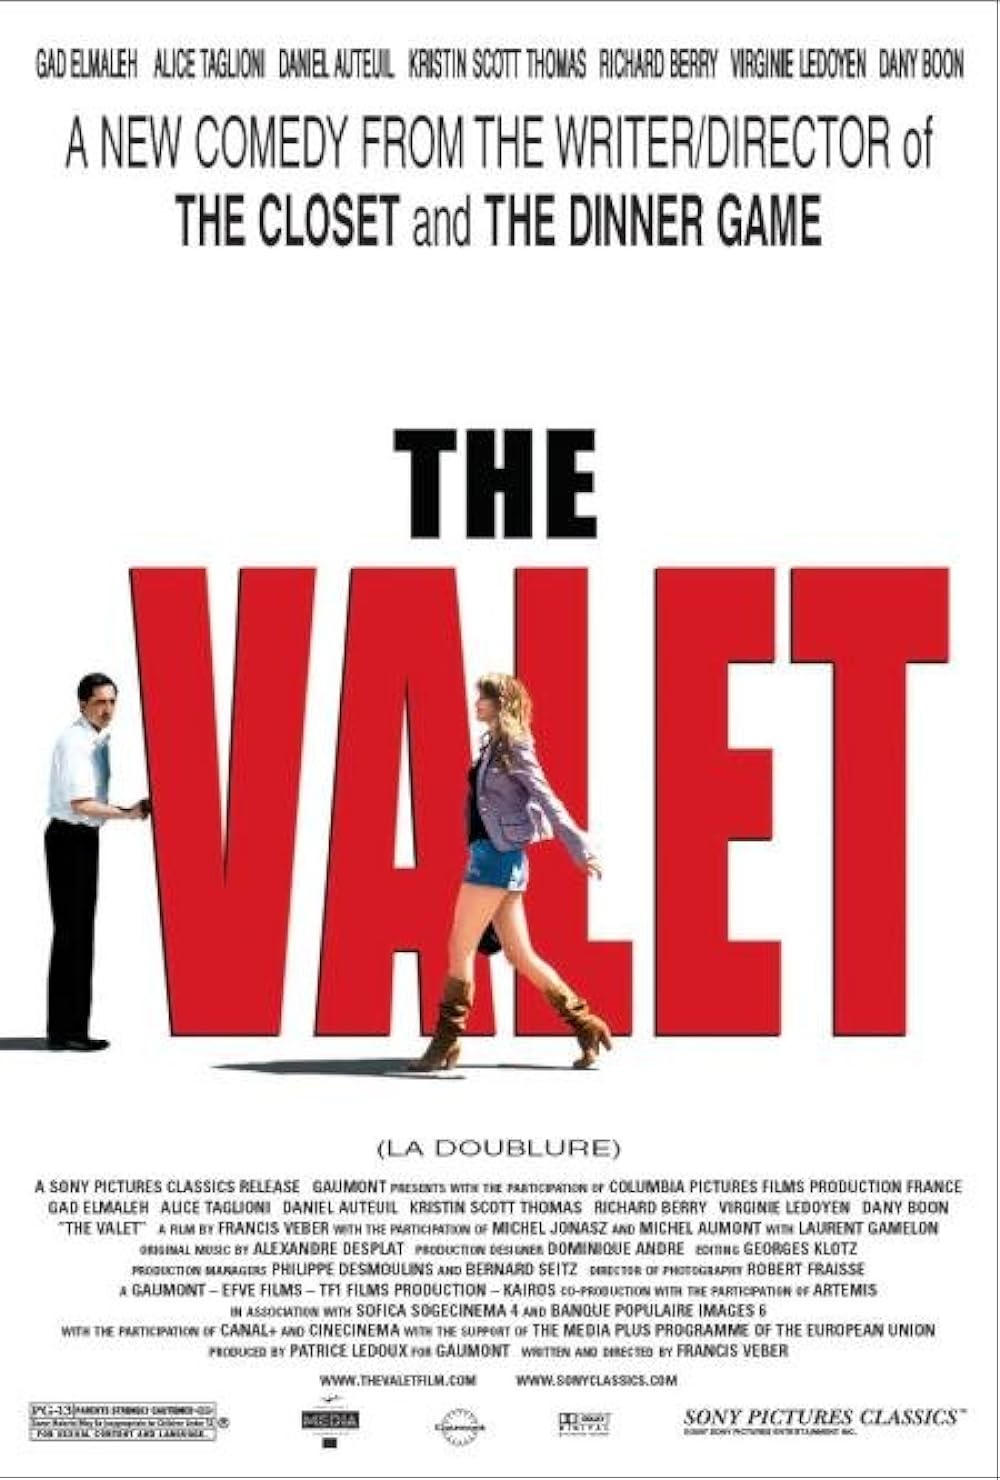 THE VALET